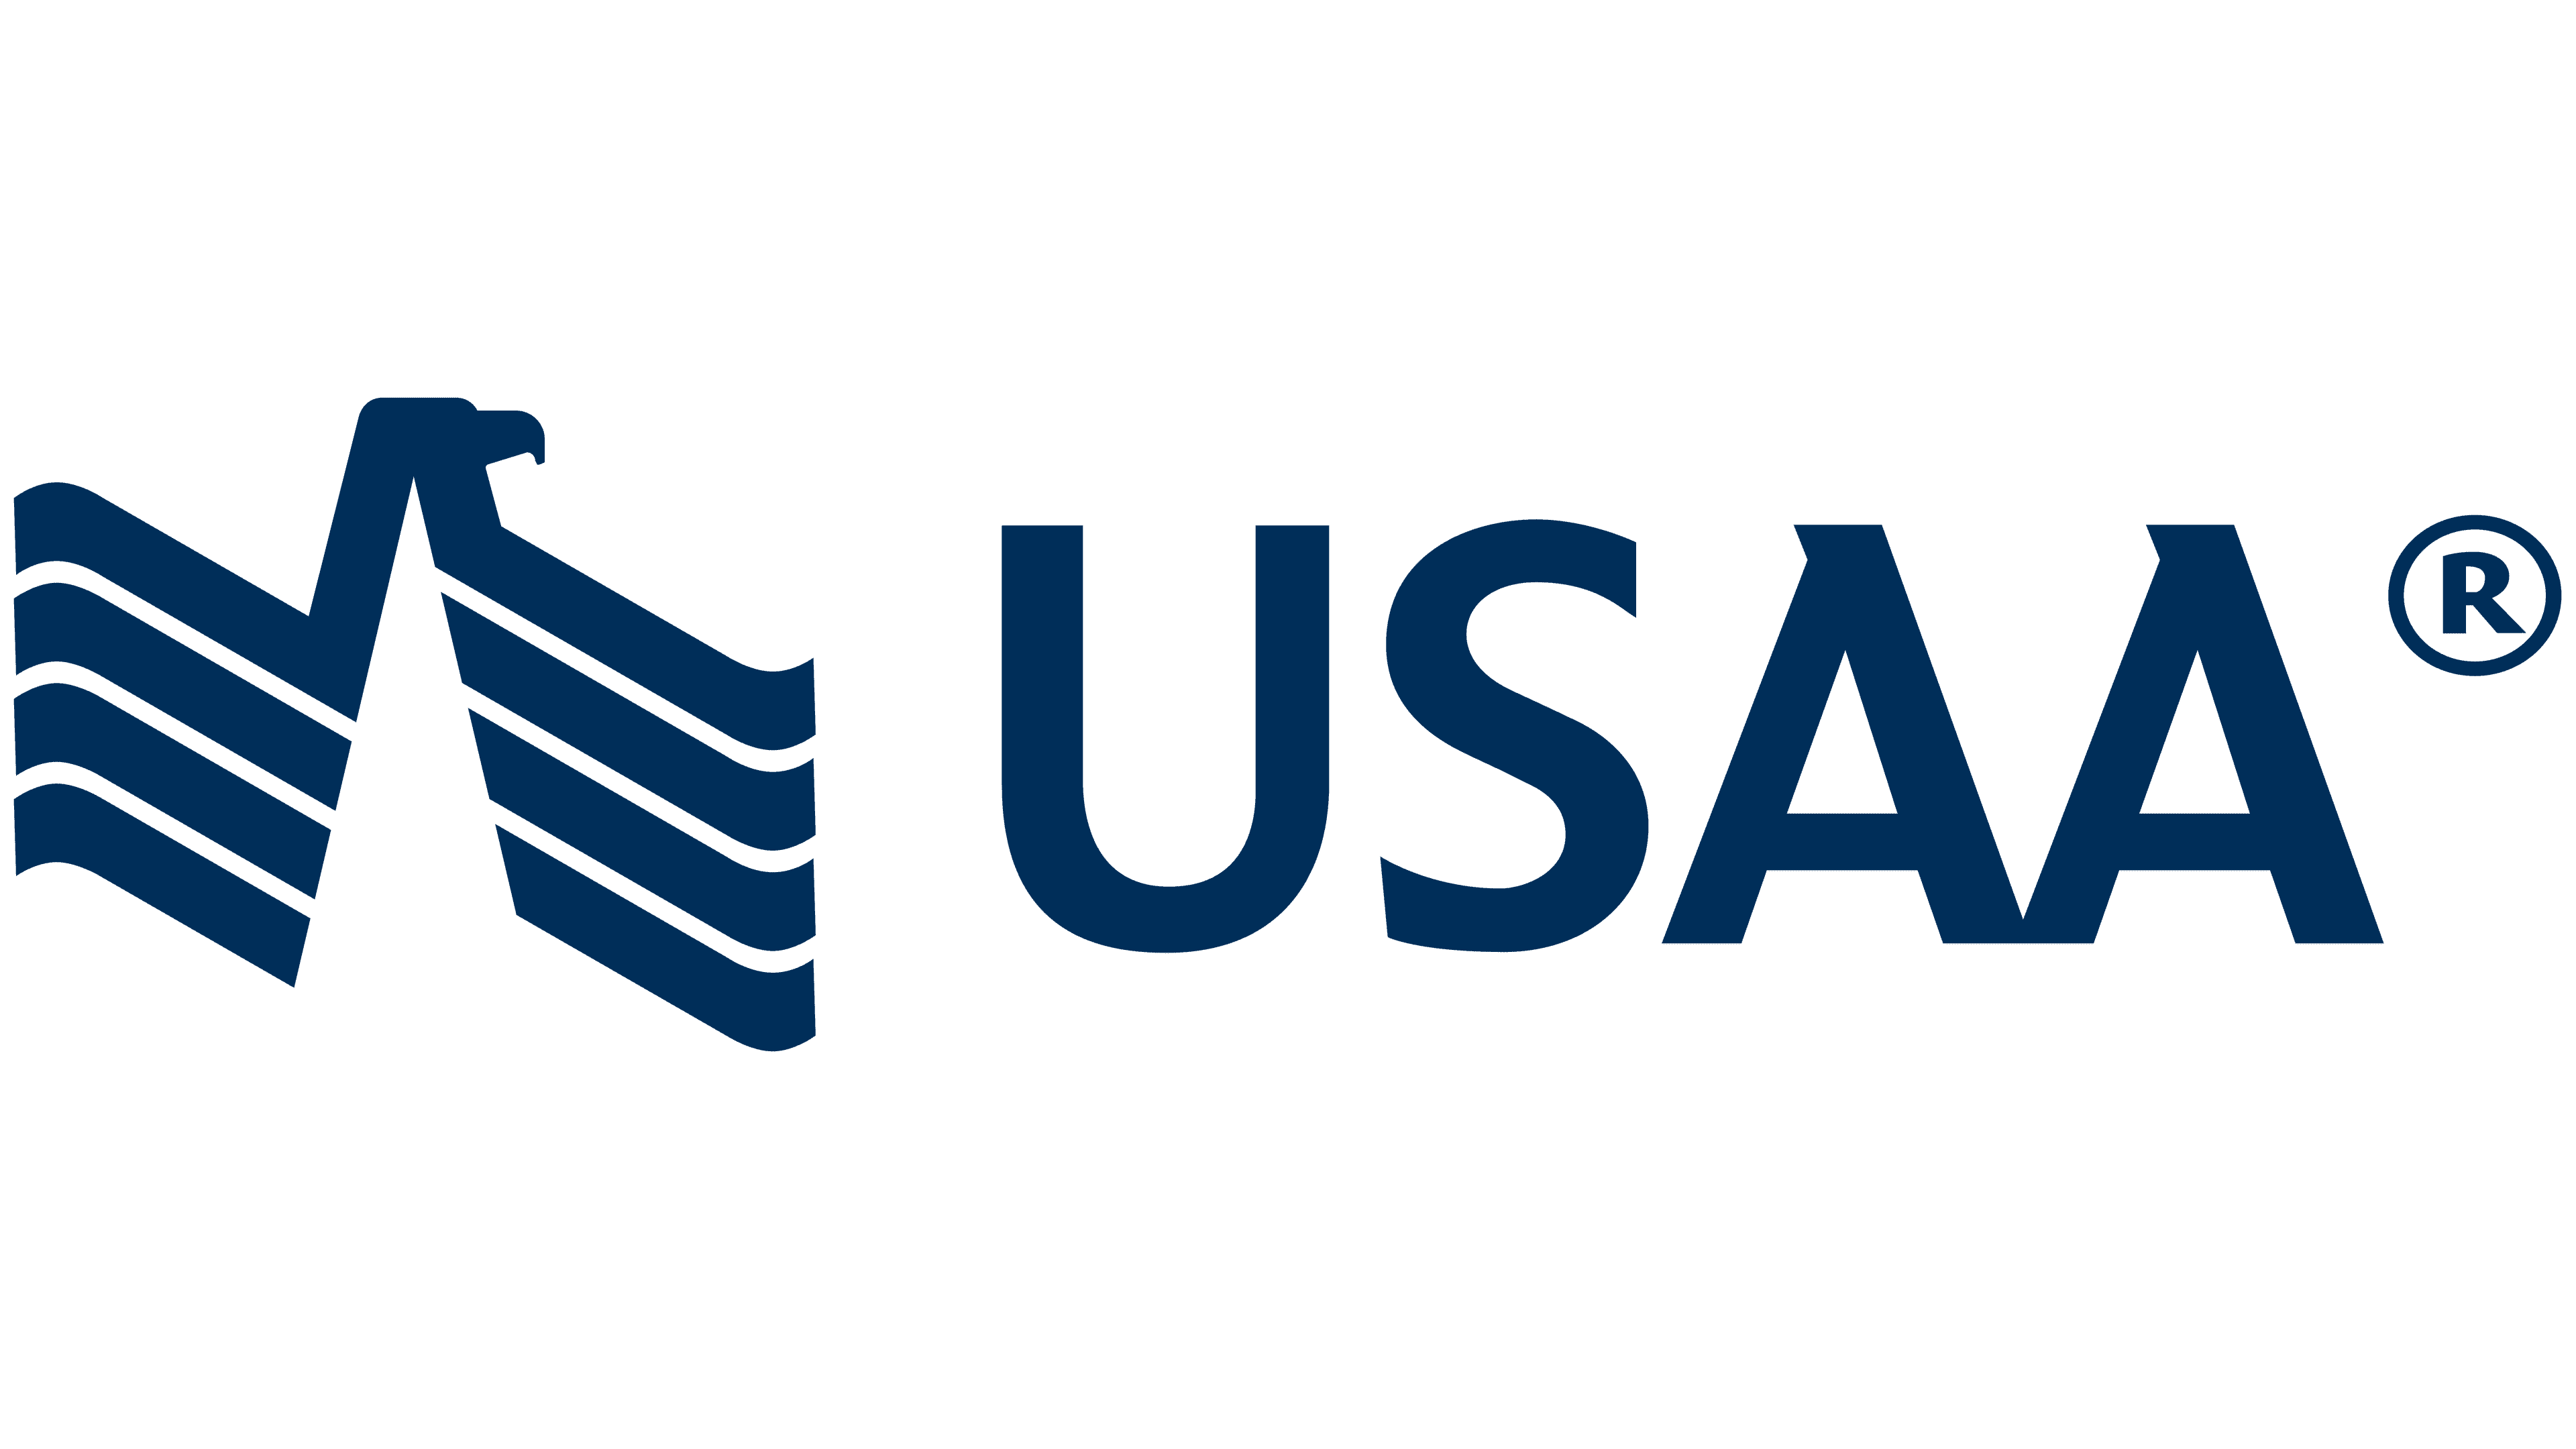 CTA We want to know what you think about USAA